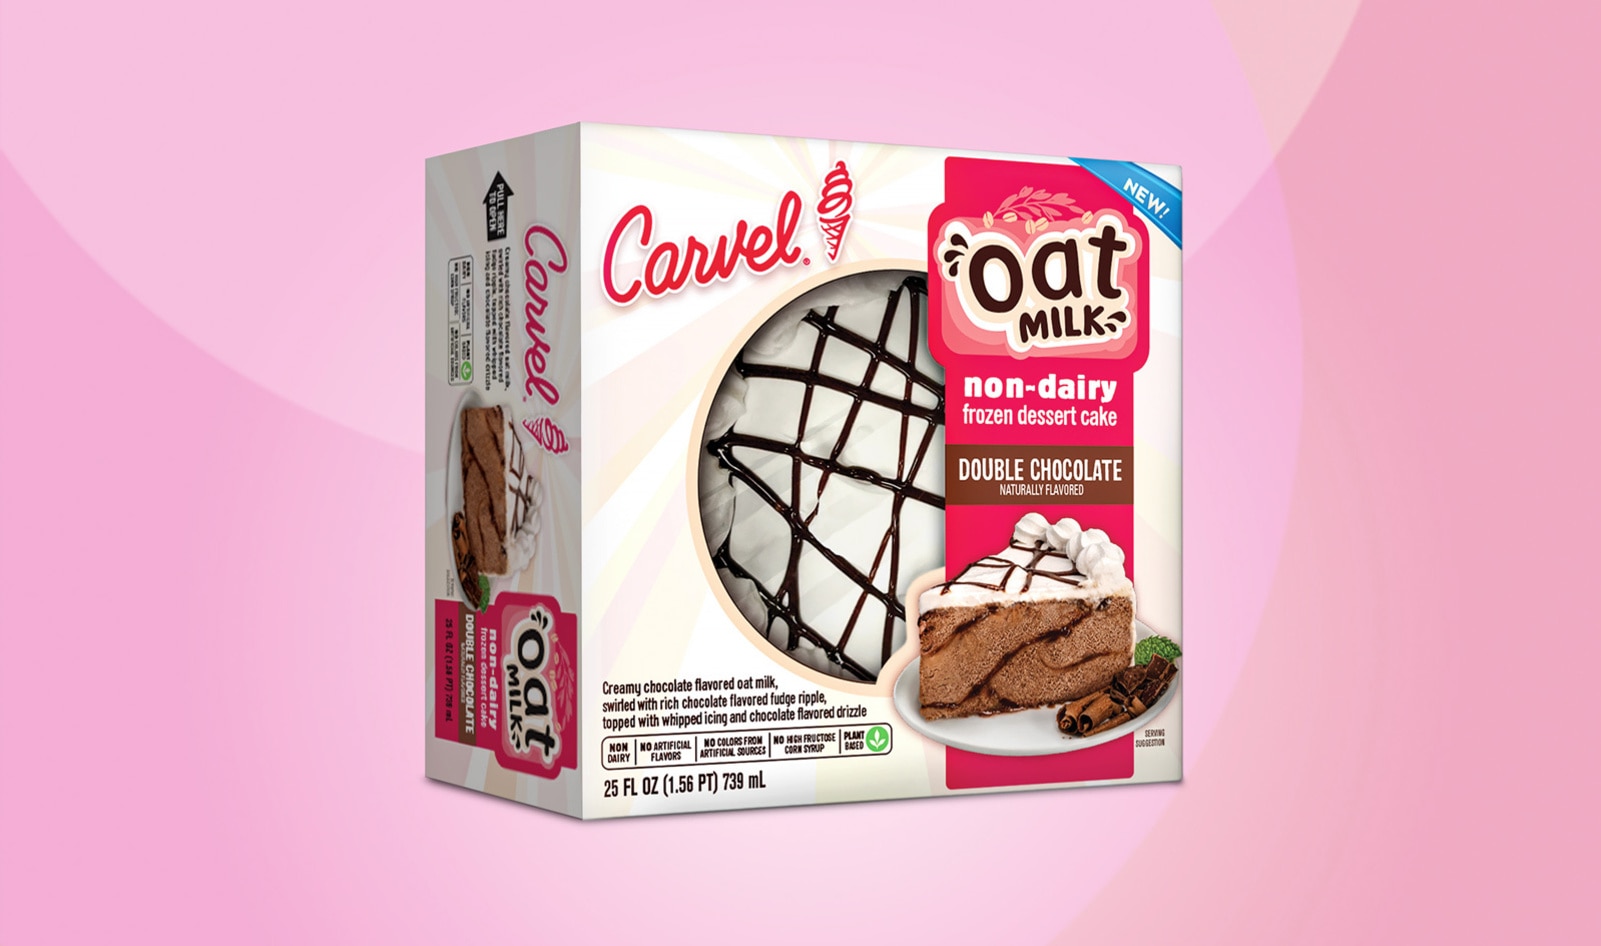 Carvel’s First Vegan Ice Cream Cakes Are Here and They’re Made With Oat Milk